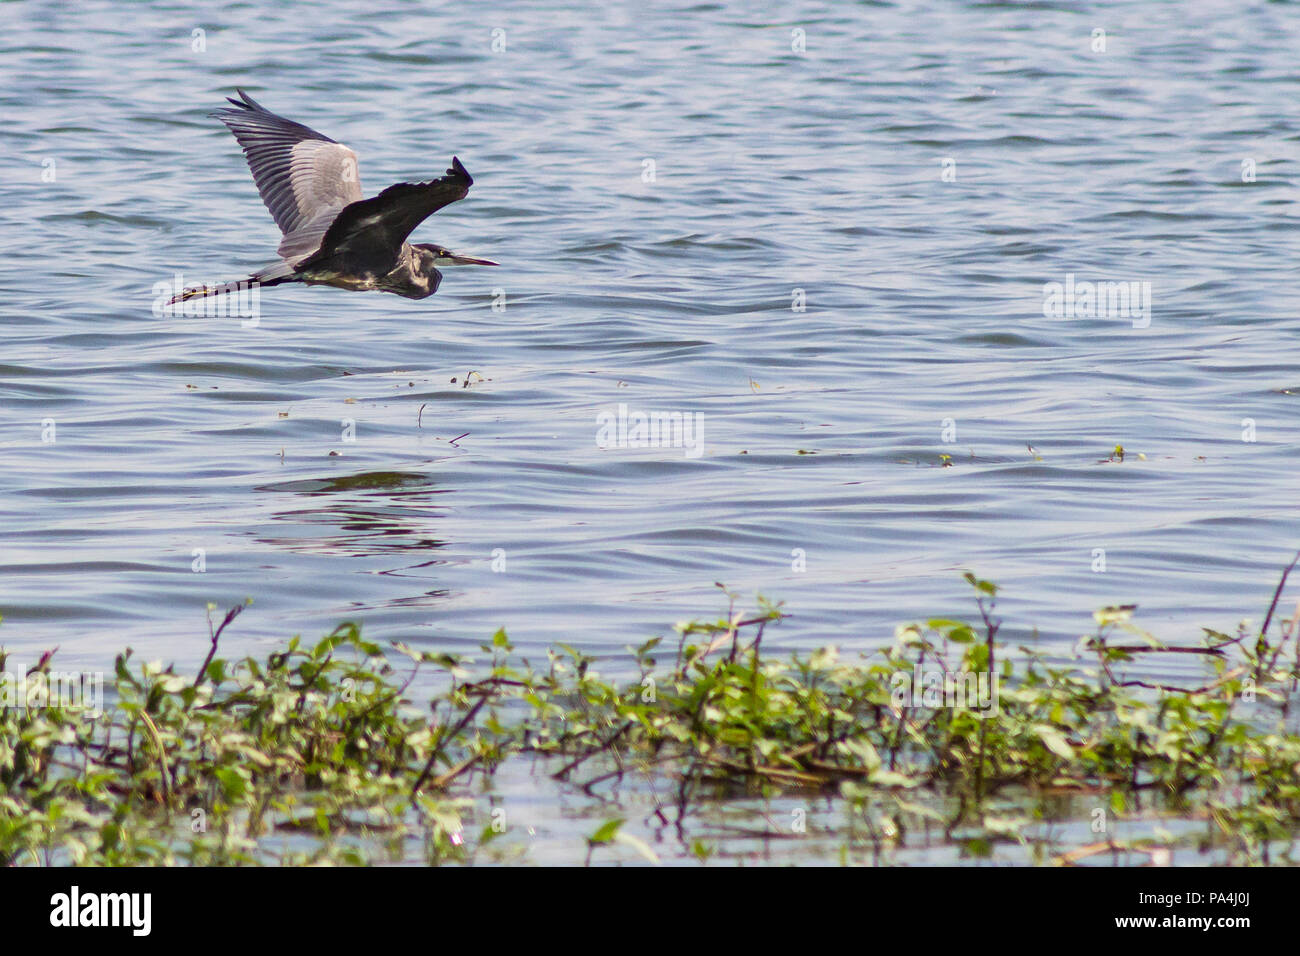 A Great Blue Heron soaring gracefully over a body of water Stock Photo